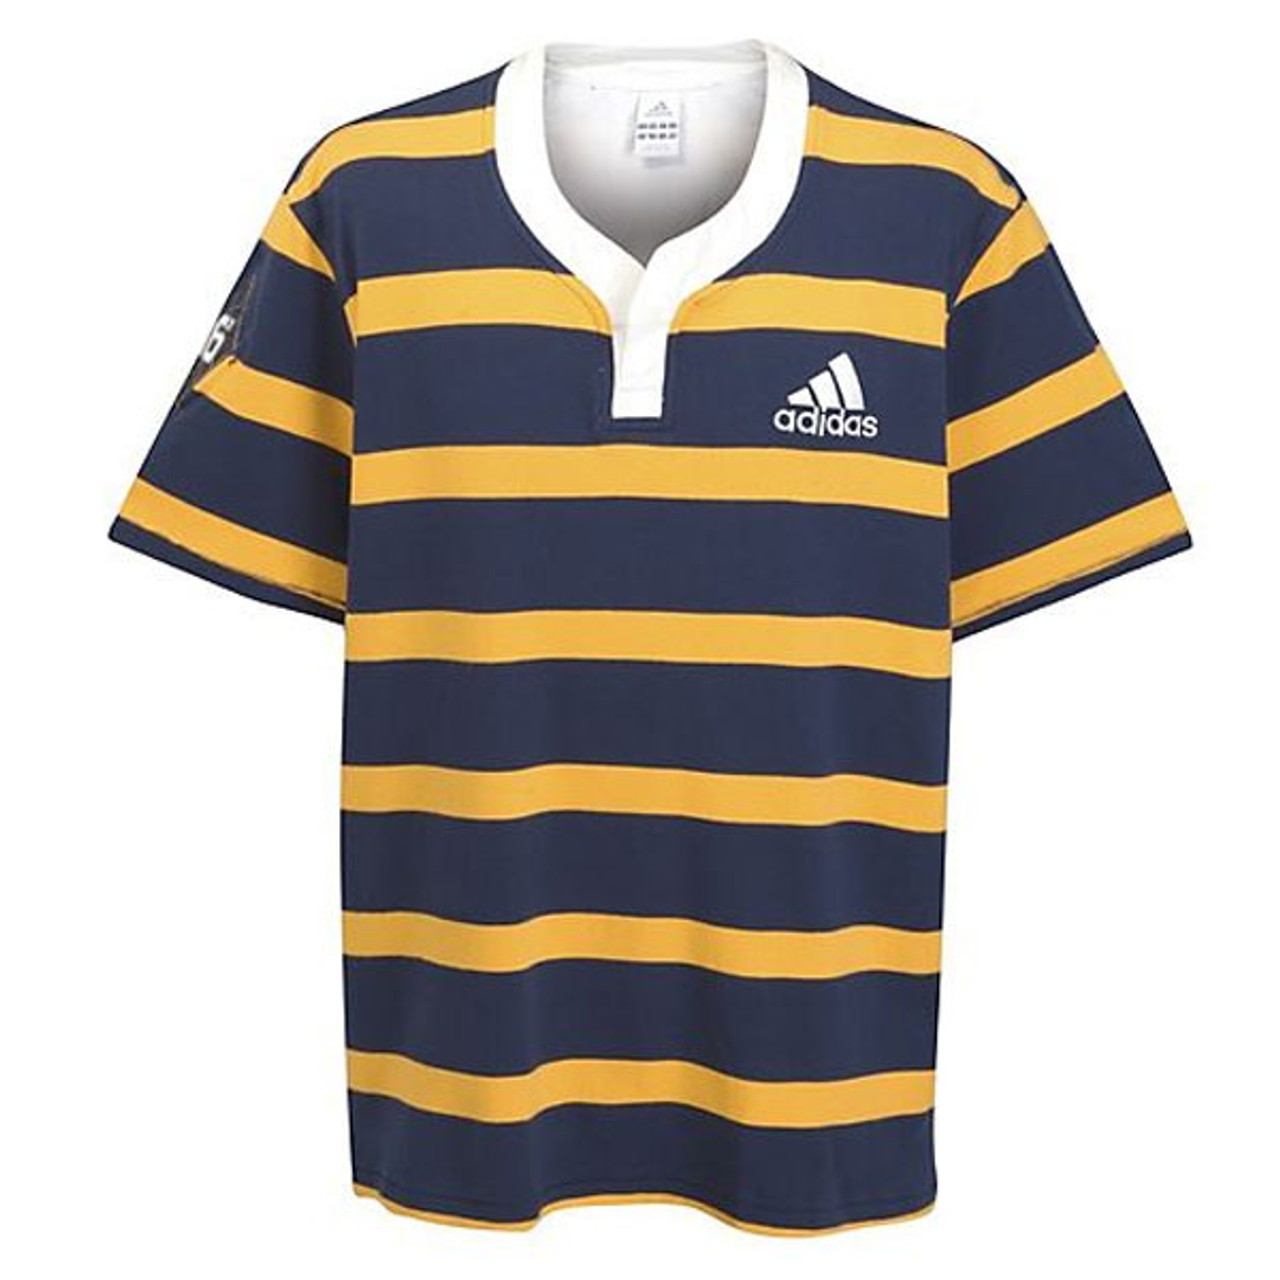 adidas rugby clothing